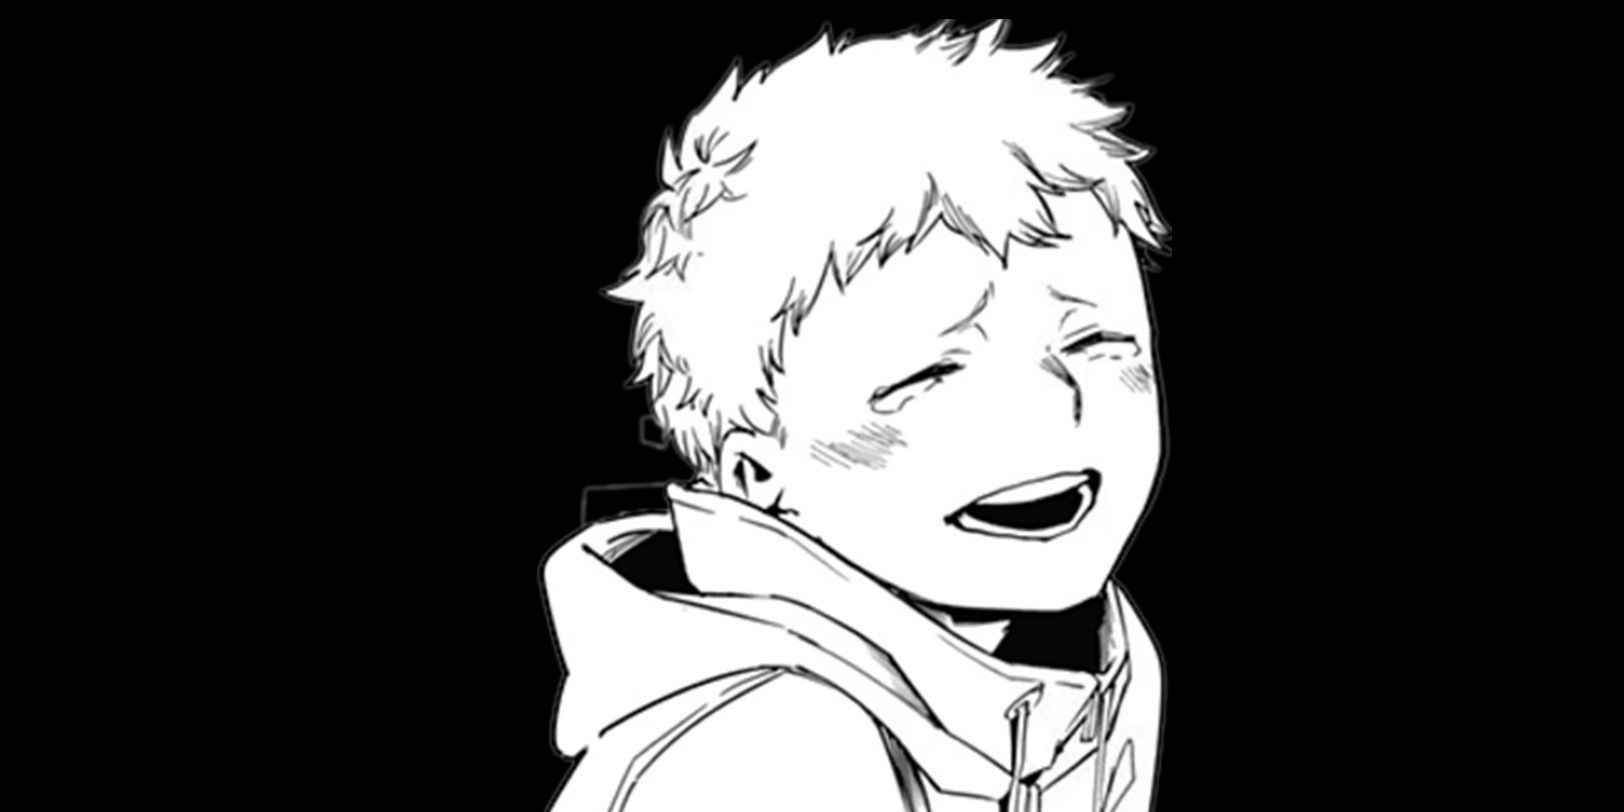 My Hero Academia's Takeshi Bushijima crying about his Quirk, Poison Gas.